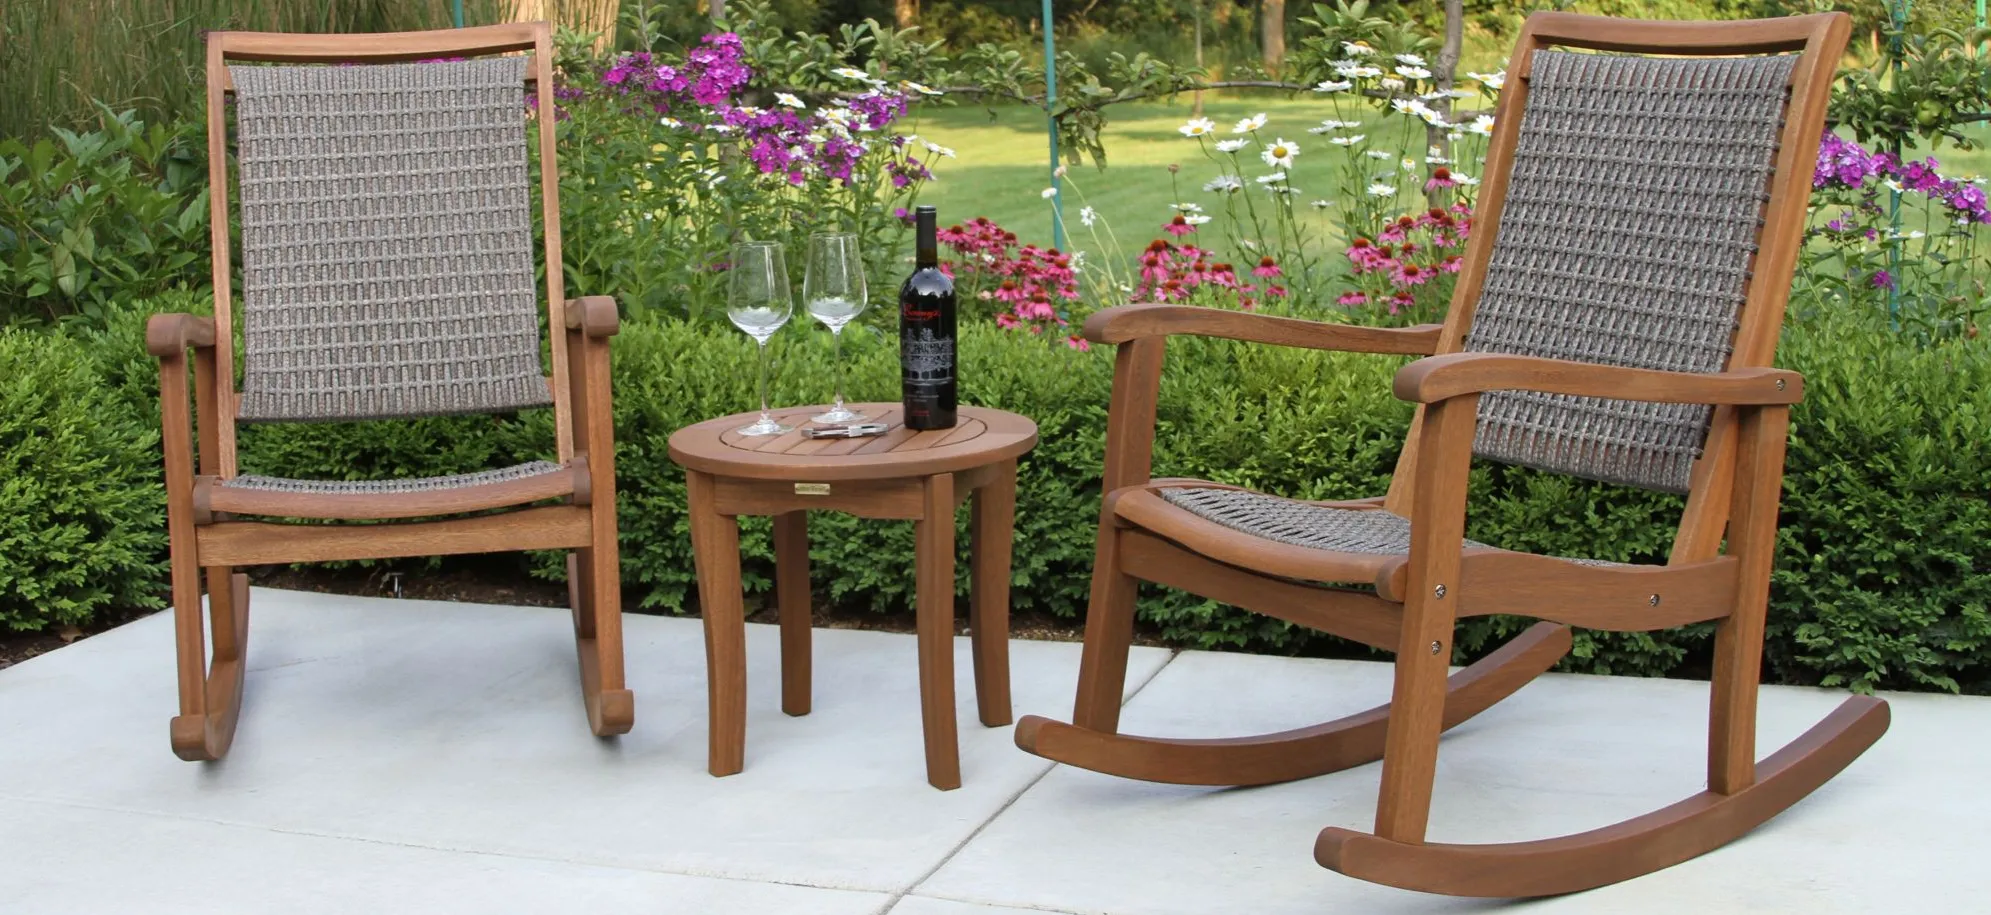 Ocean Ave 3-pc. Outdoor Seating Set in Walnut by Outdoor Interiors